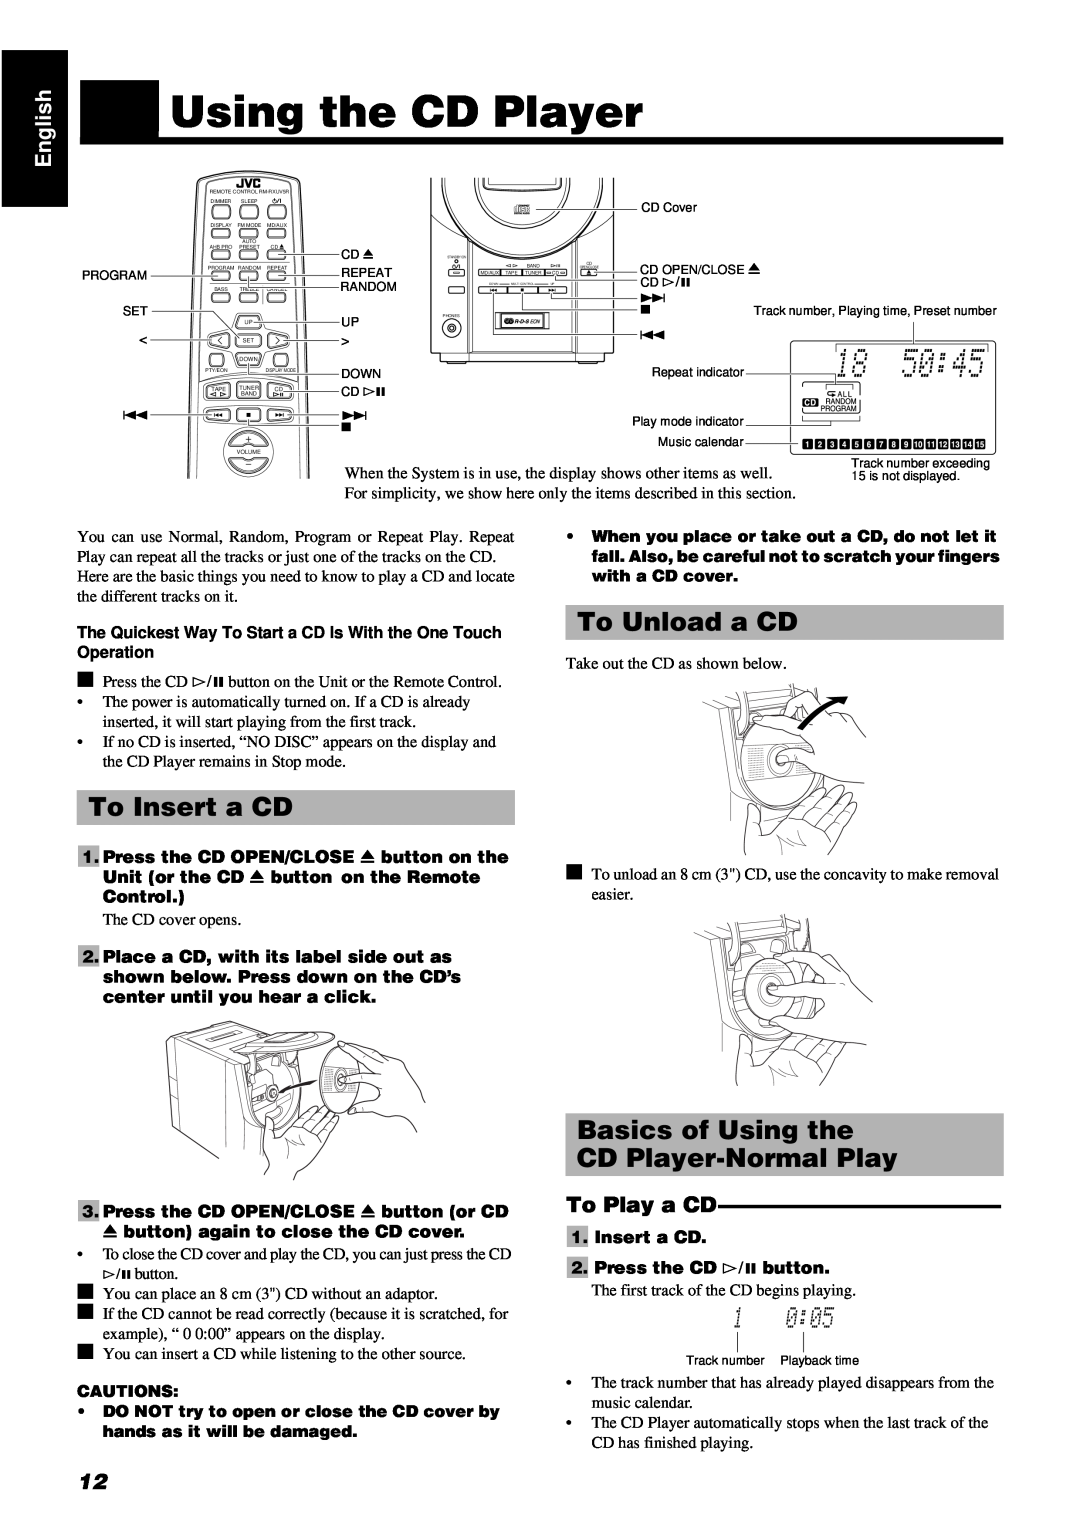 JVC RM-RXUV5R, UX-V5R To Insert a CD, To Unload a CD, Basics of Using the CD Player-NormalPlay, To Play a CD, Control 